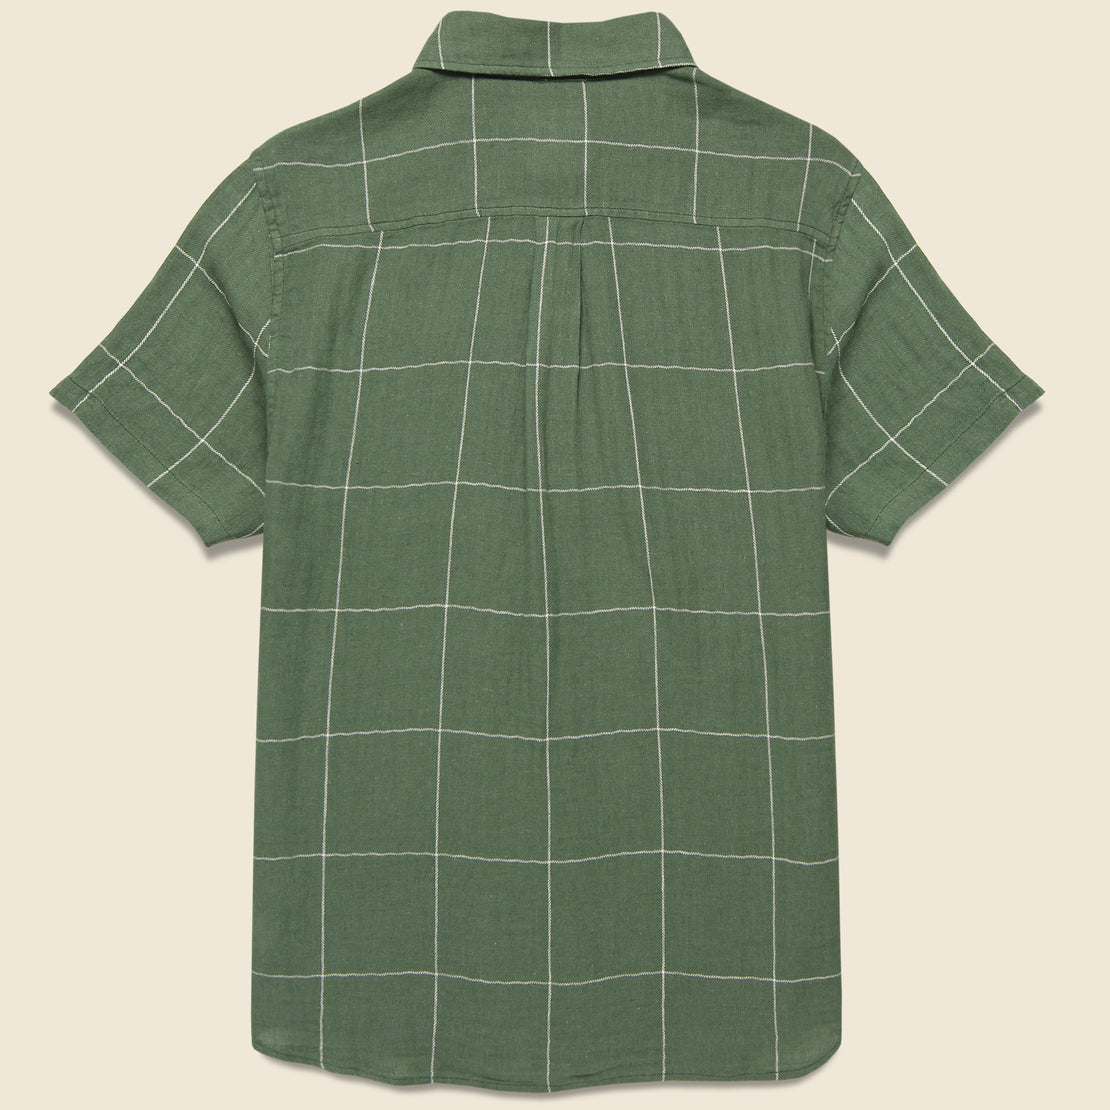 Monty Shirt - Olive - Katin - STAG Provisions - Tops - S/S Woven - Plaid